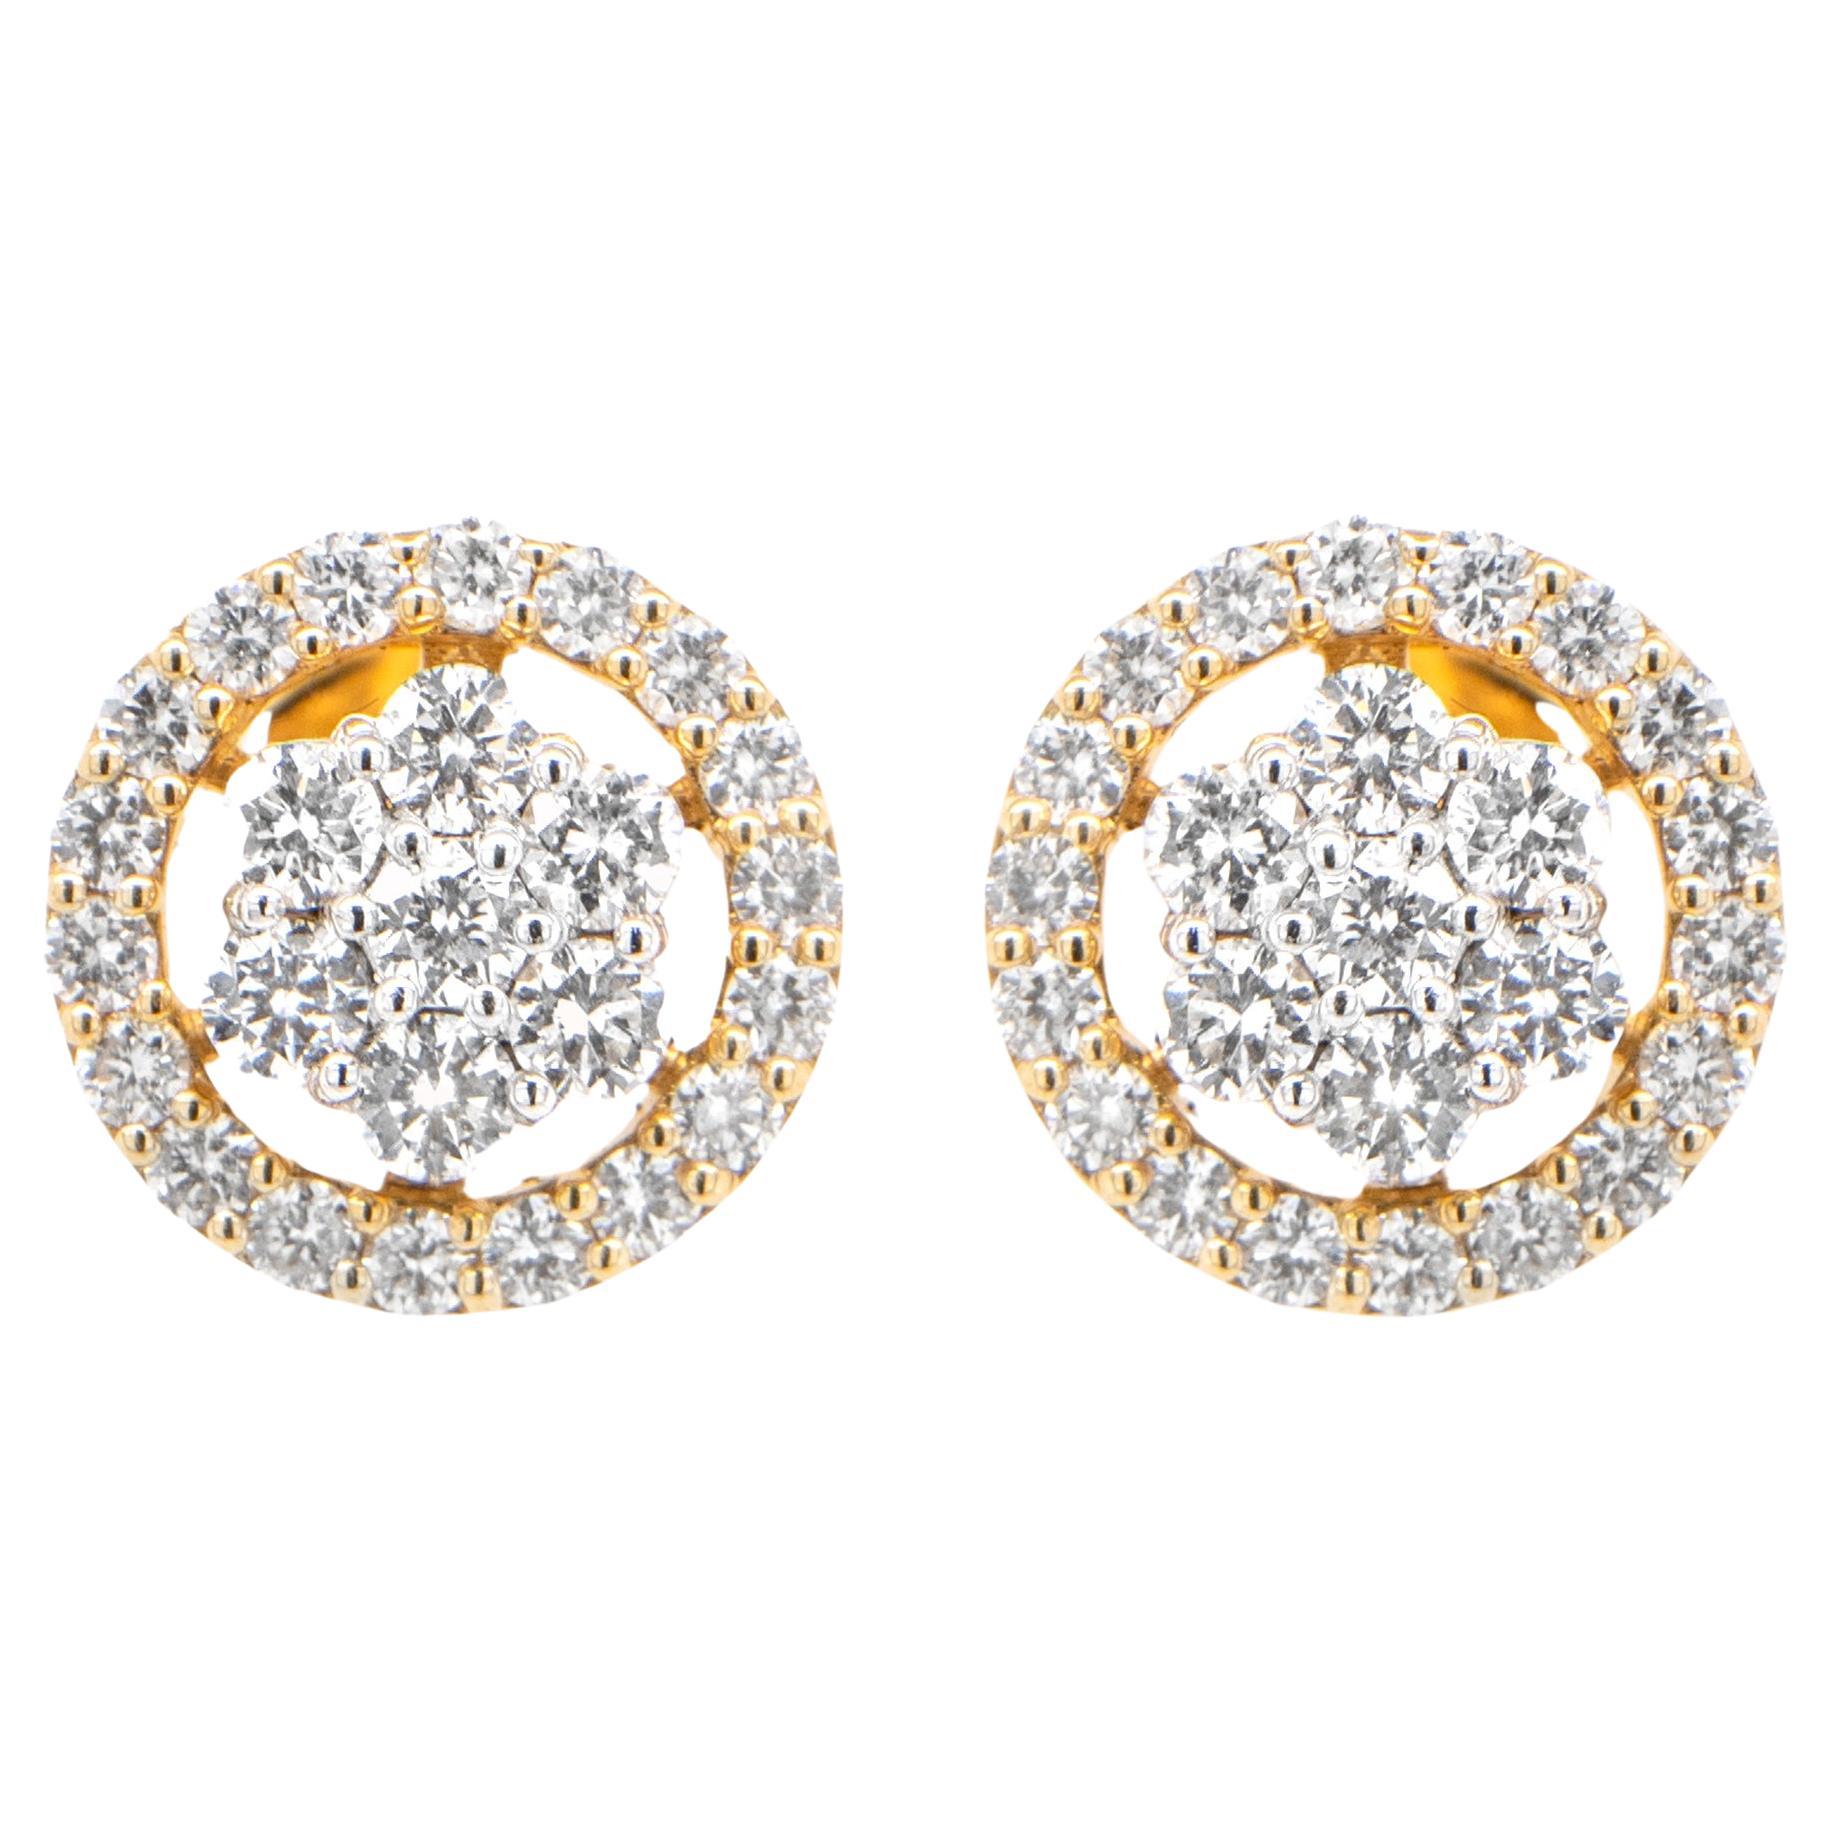 Diamond Stud Earrings 2.40 Carats Total 18k Yellow Gold For Sale